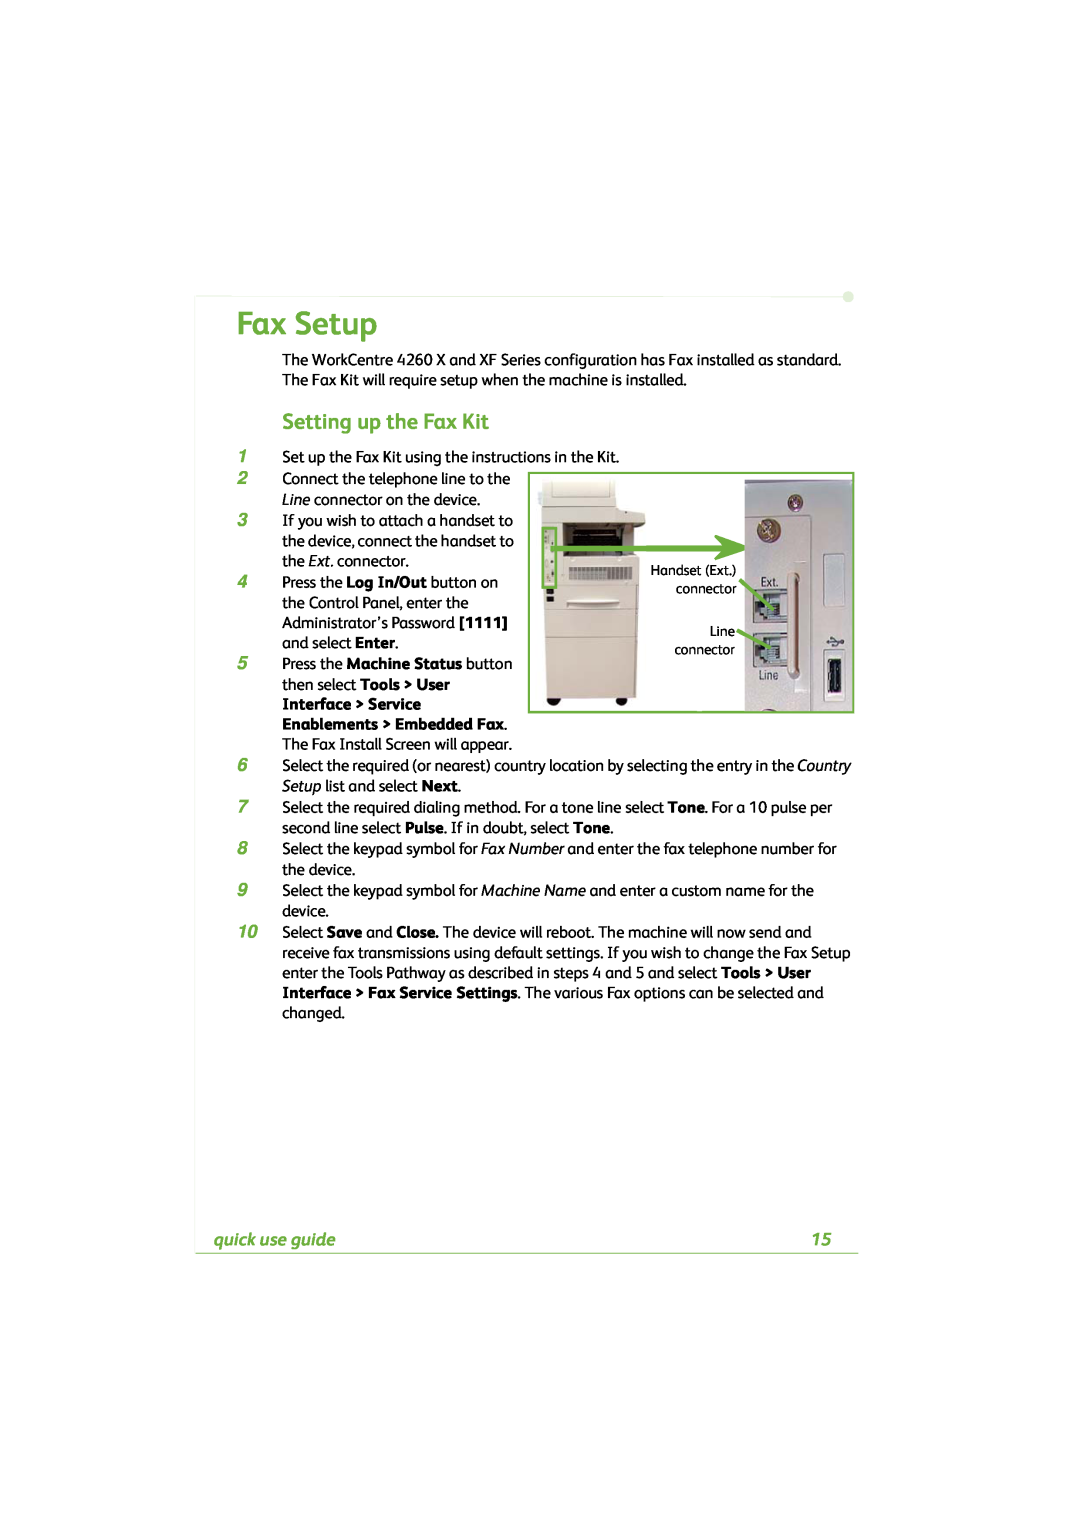 Xerox 4260C manual Fax Setup, Setting up the Fax Kit, quick use guide 